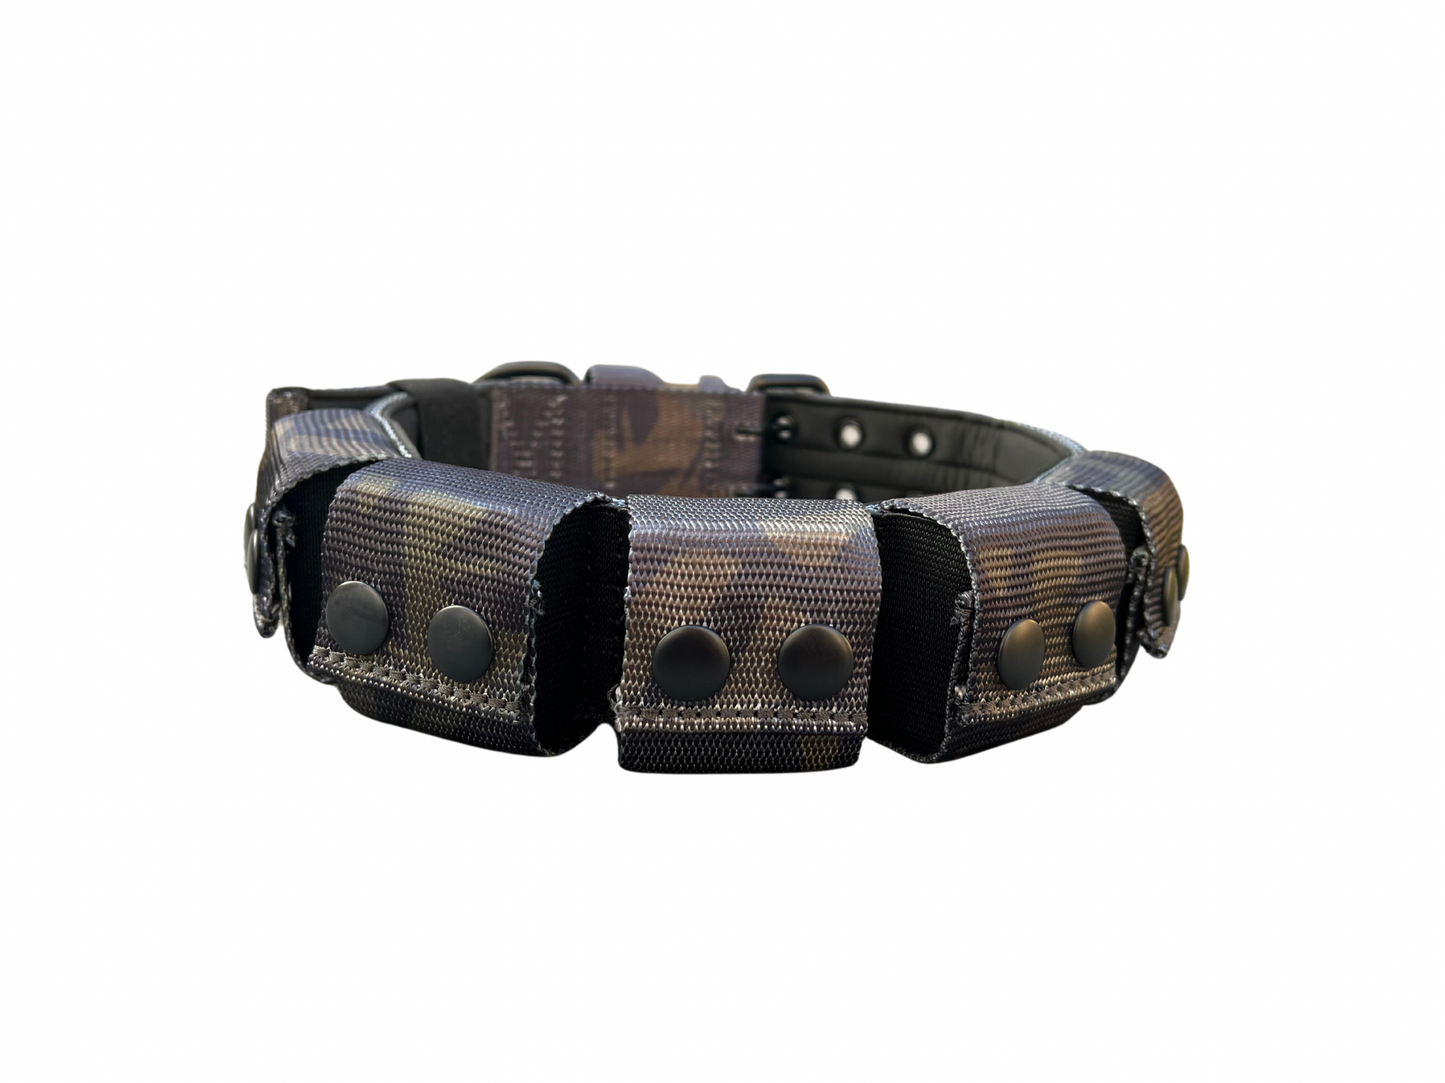 RCK9 Weighted Collar